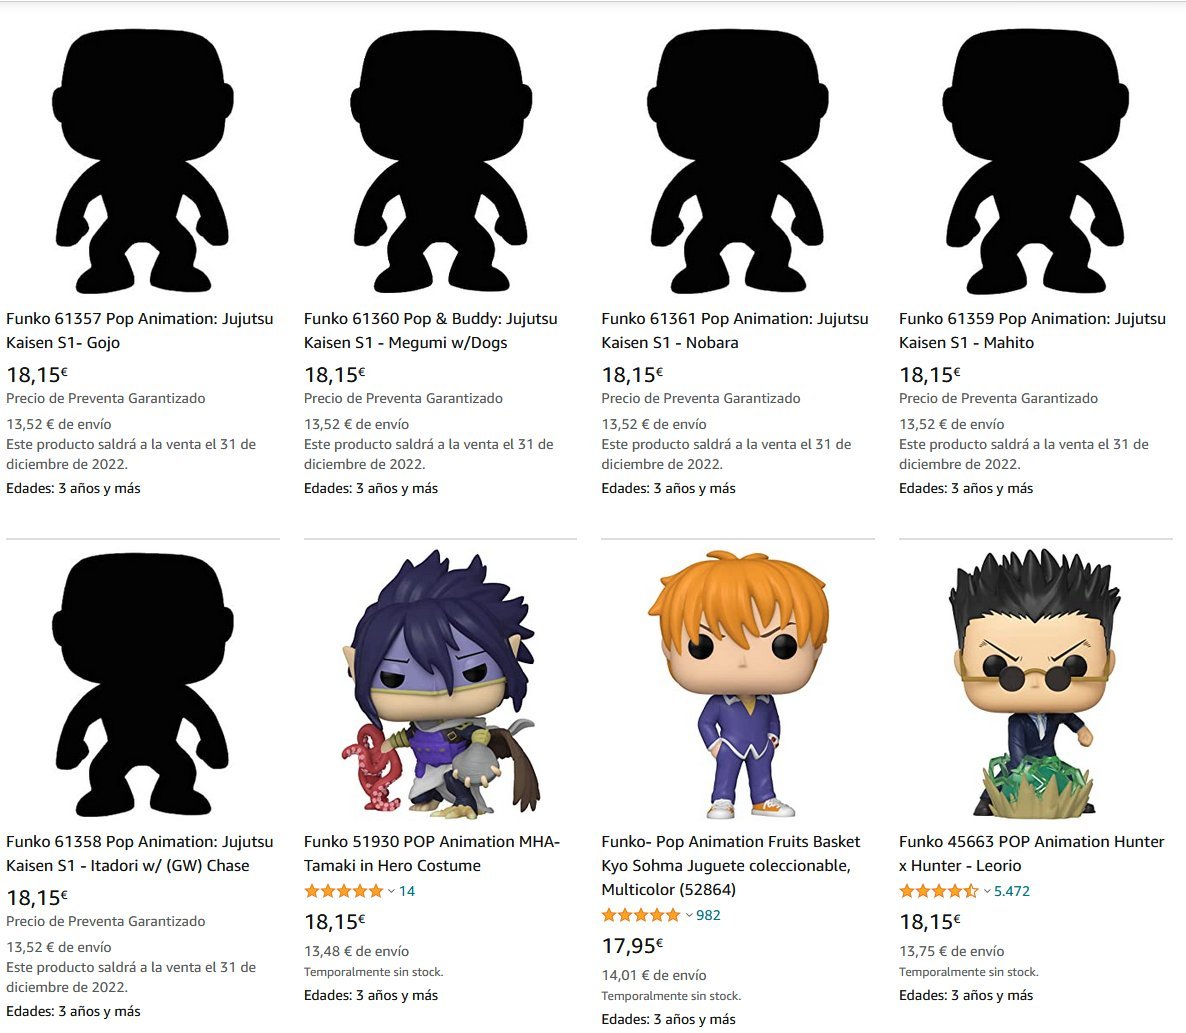 Funko POP News ! on X: Here's a reminder of the Jujutsu Kaisen